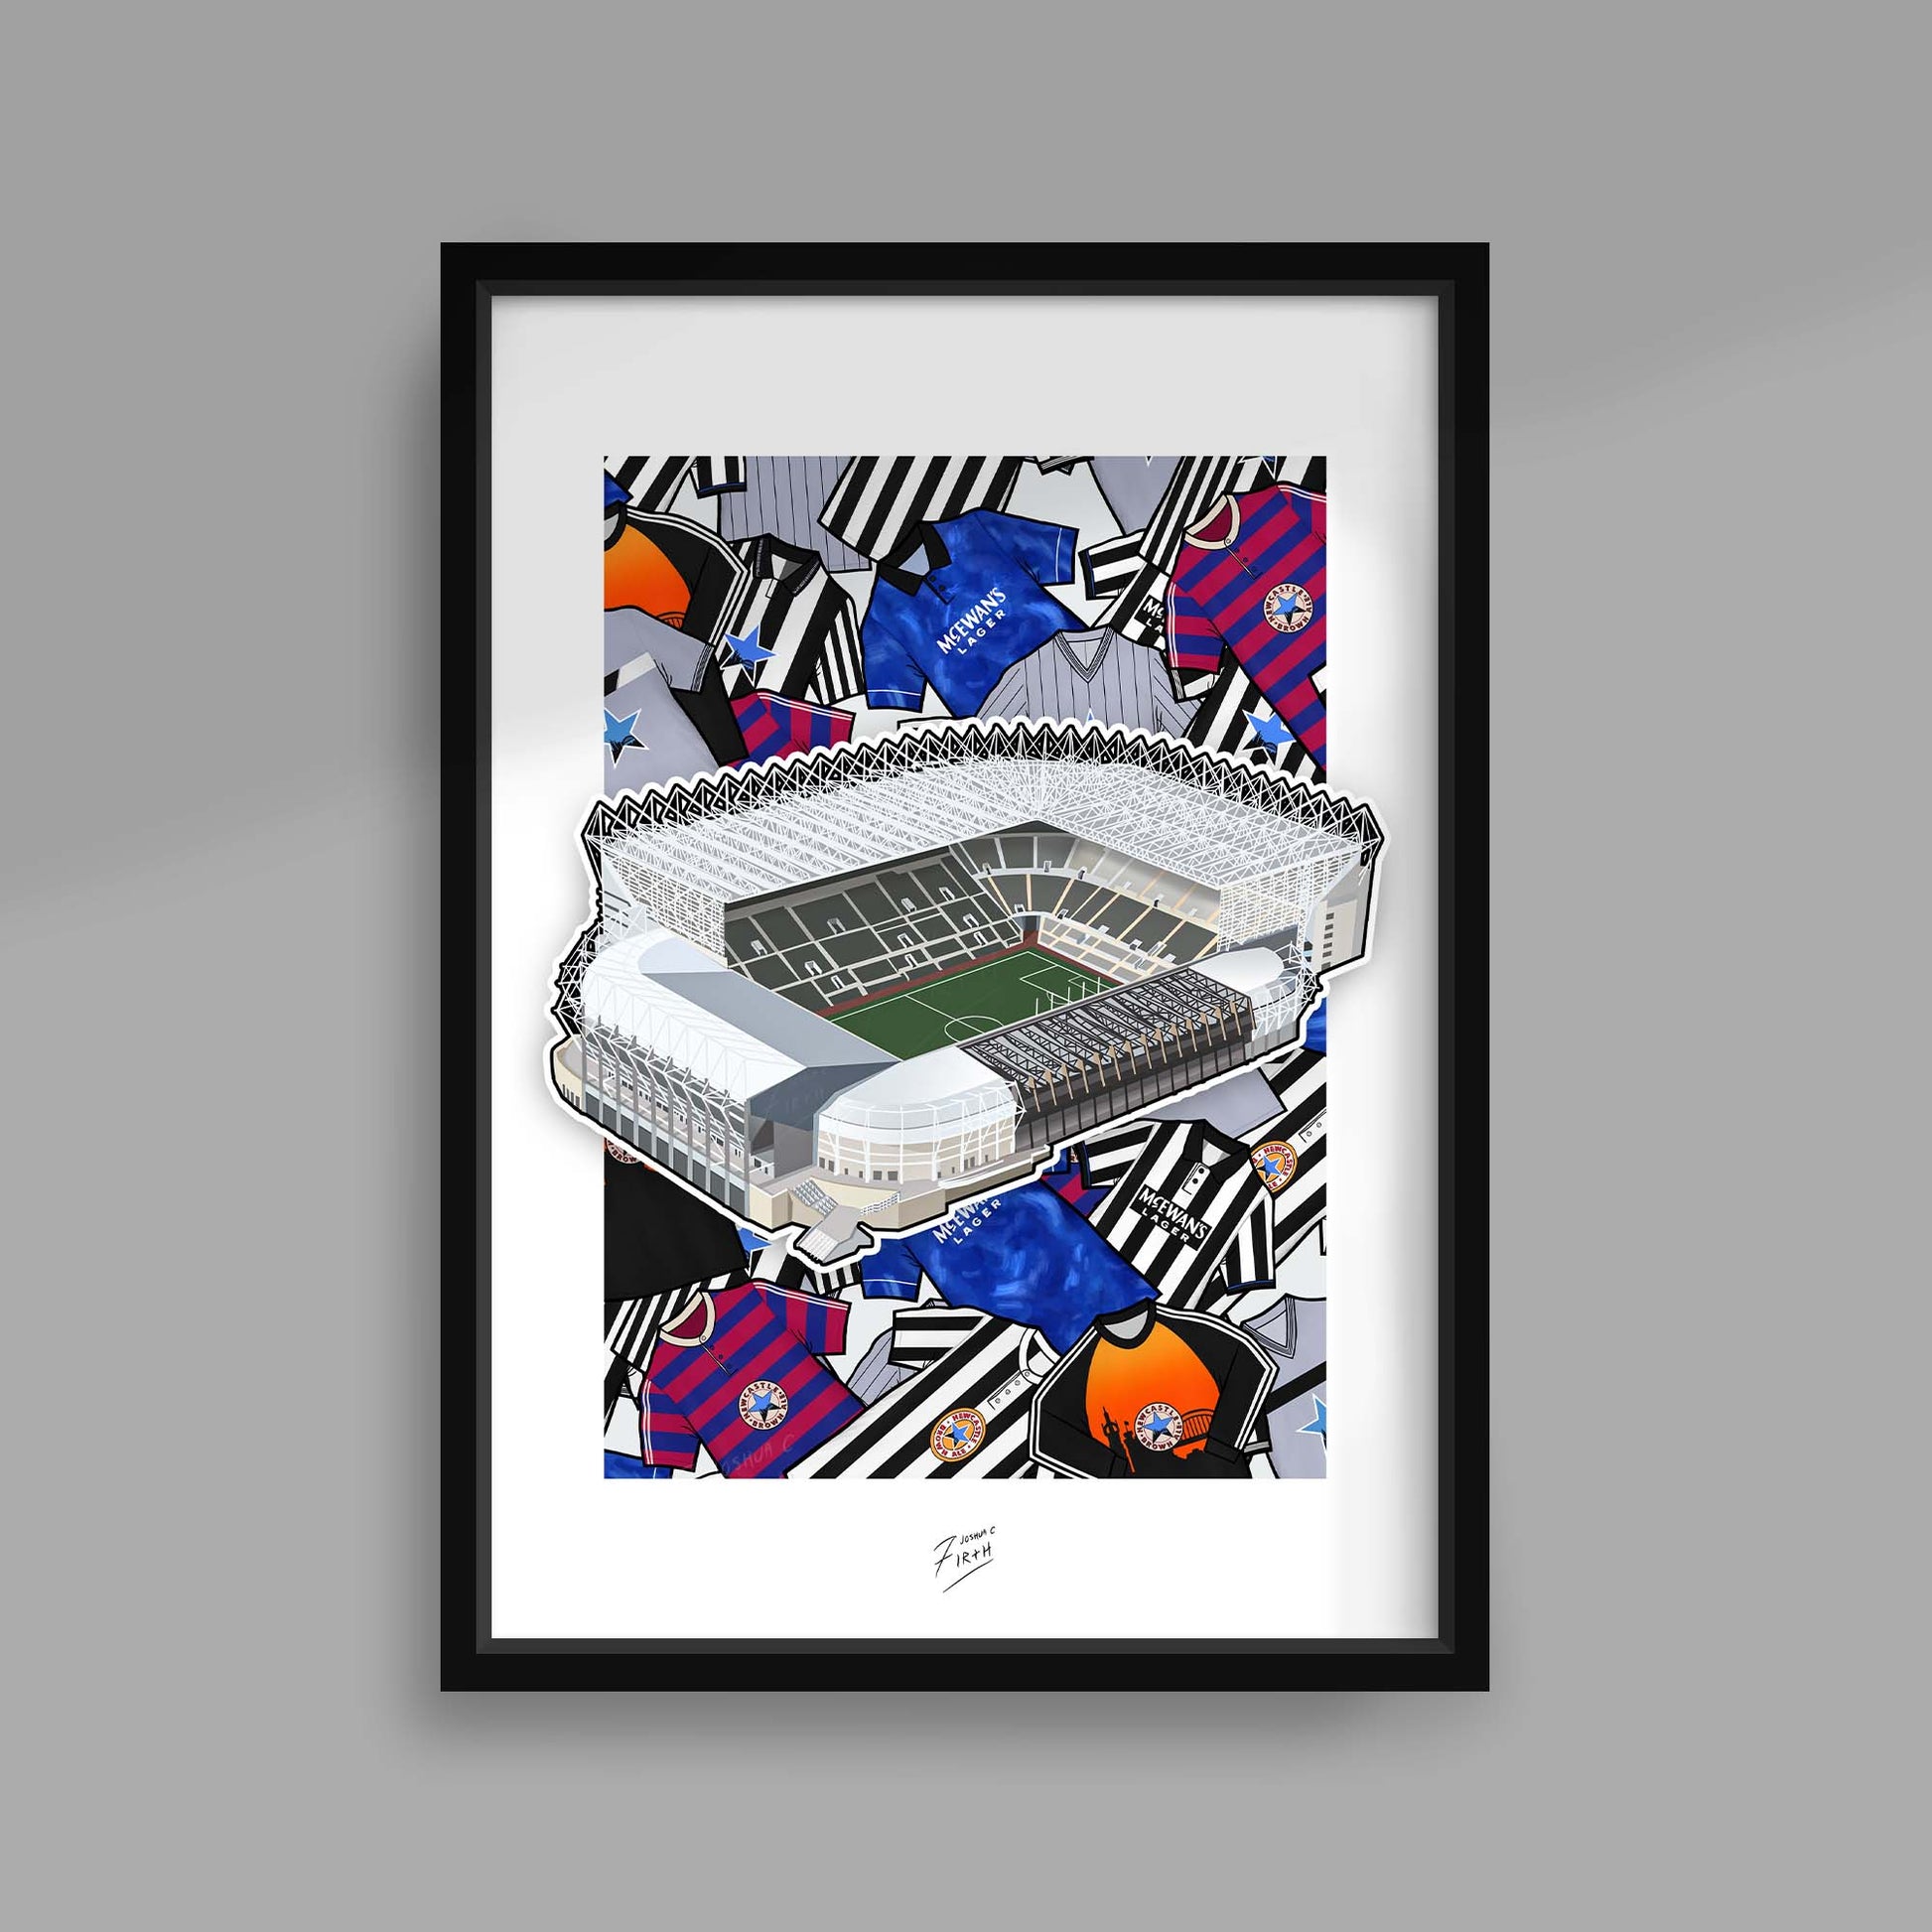 A poster print inspired by the famous St James Park, the home of Newcastle United Football Club, with iconic retro shirts behind it